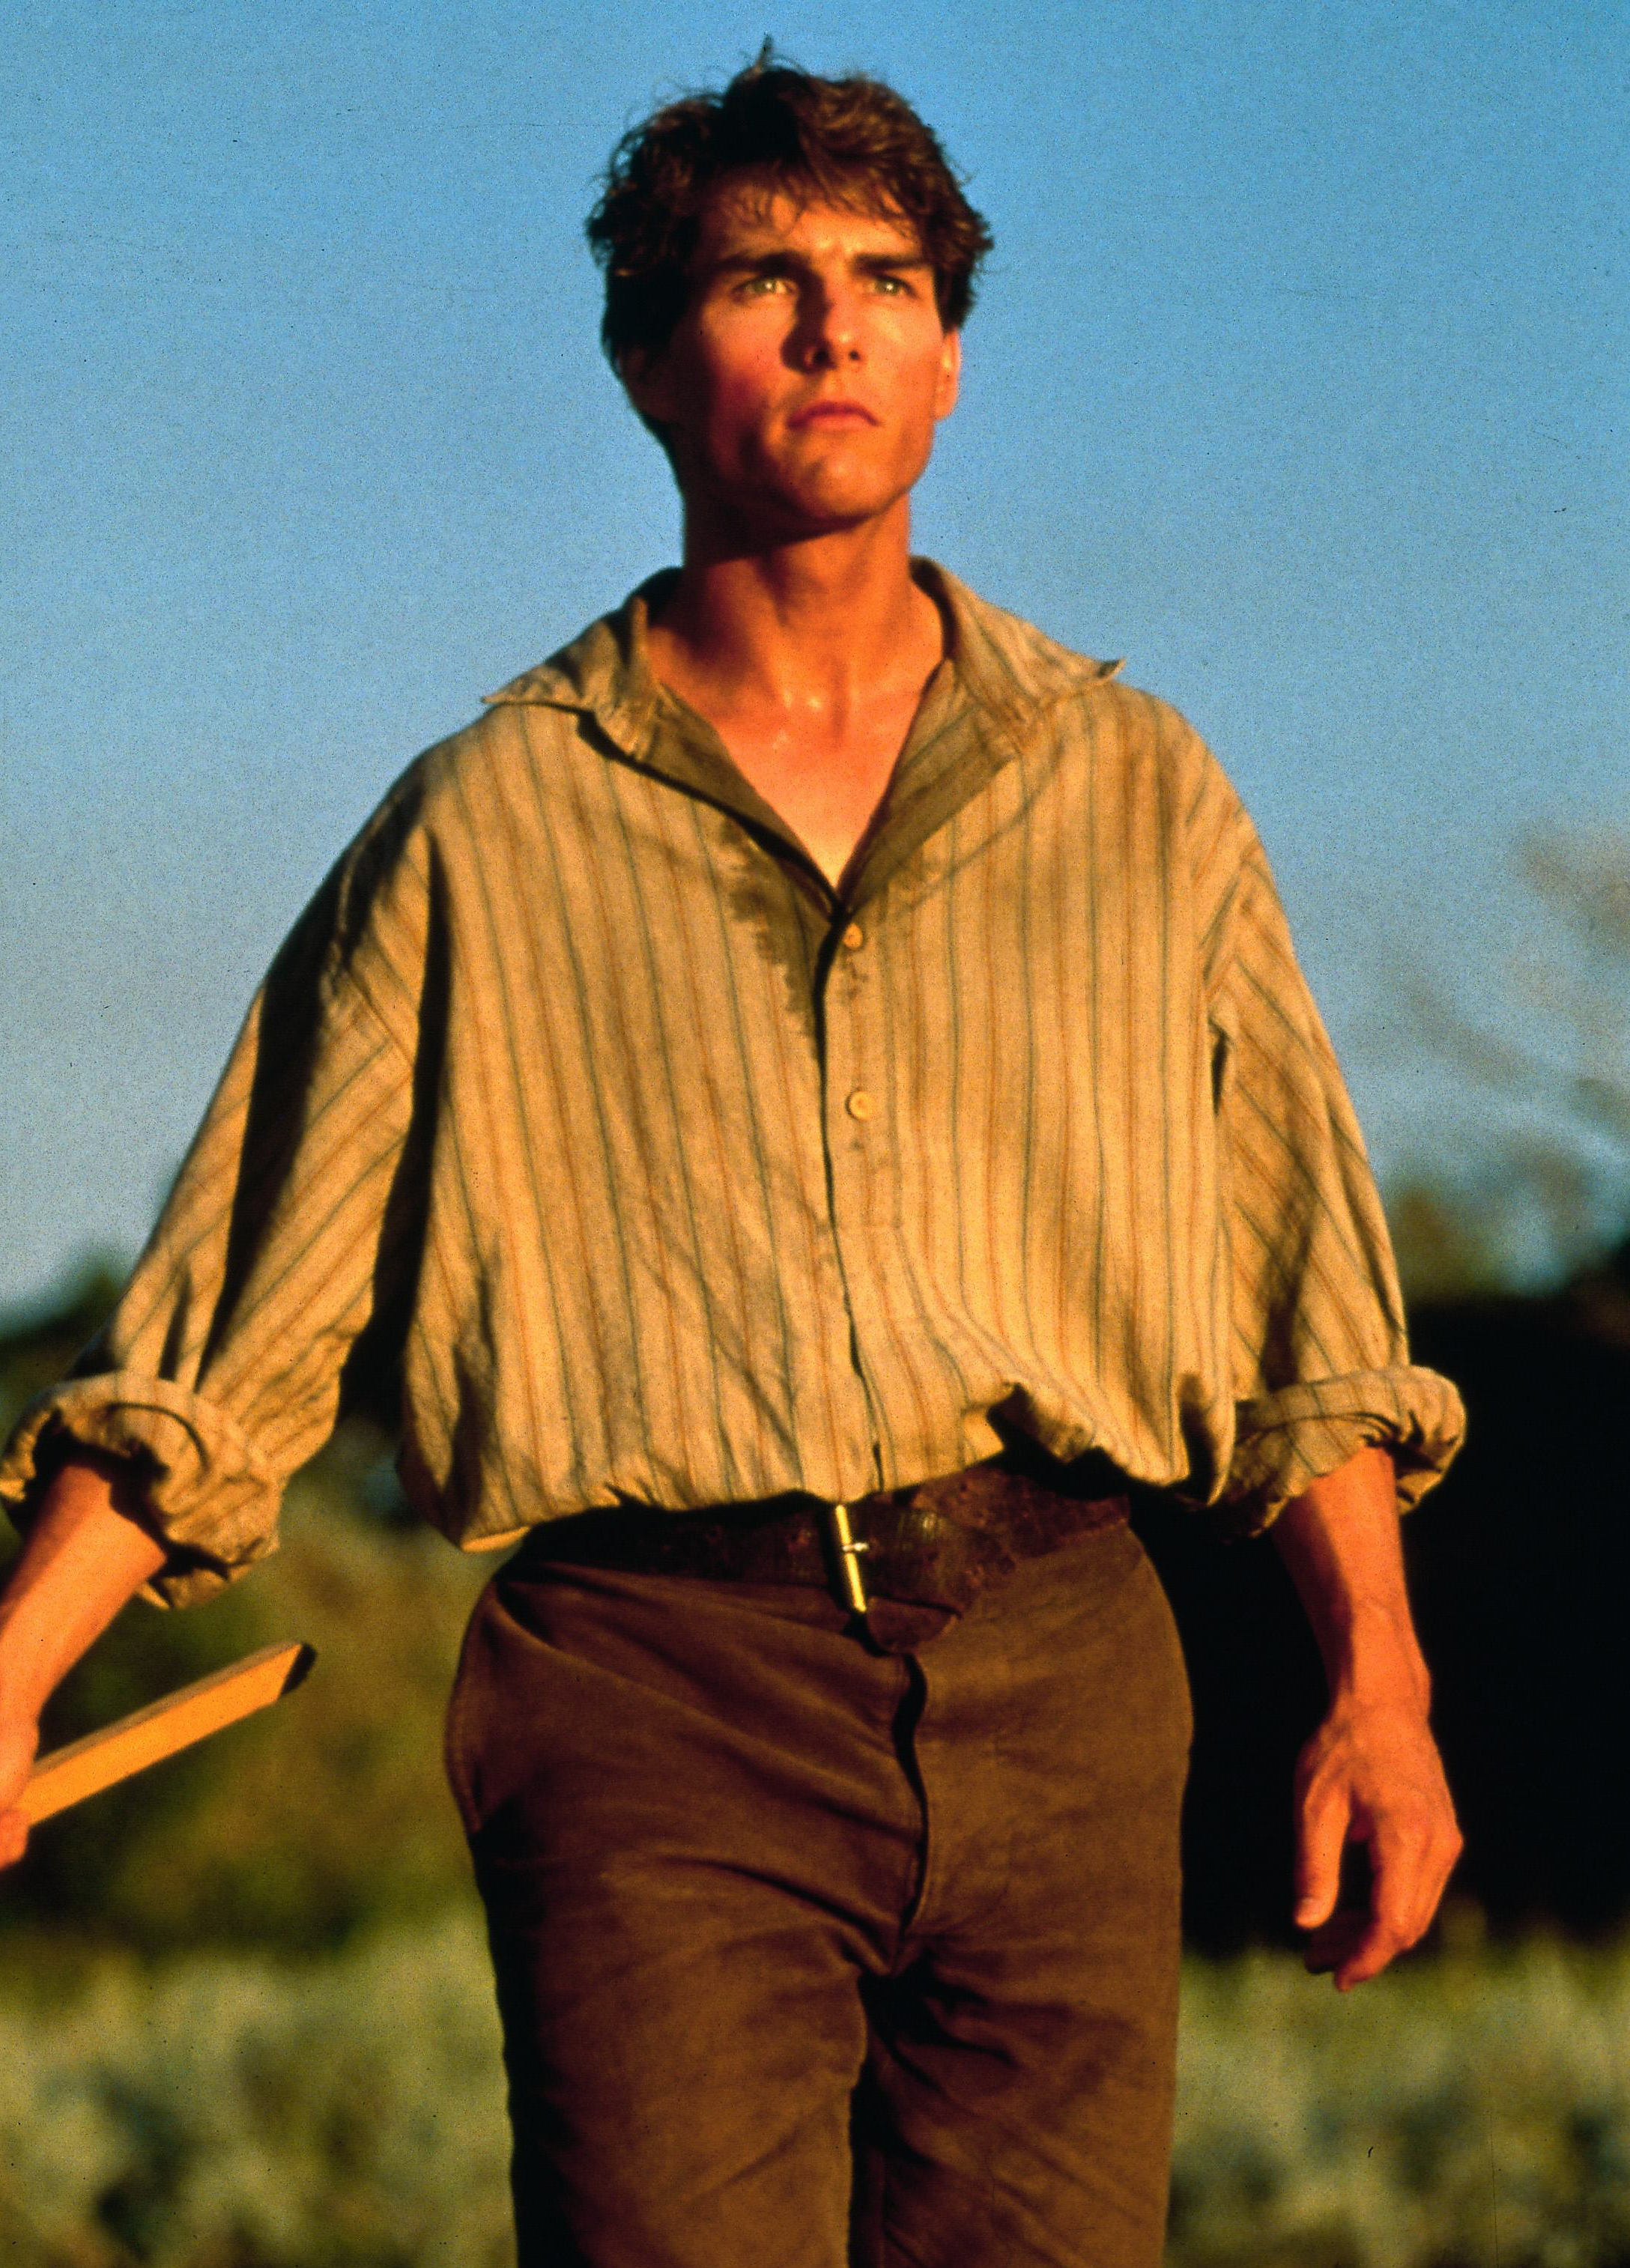 Tom Cruise as Joseph Donnelly in Far and Away, 1992.